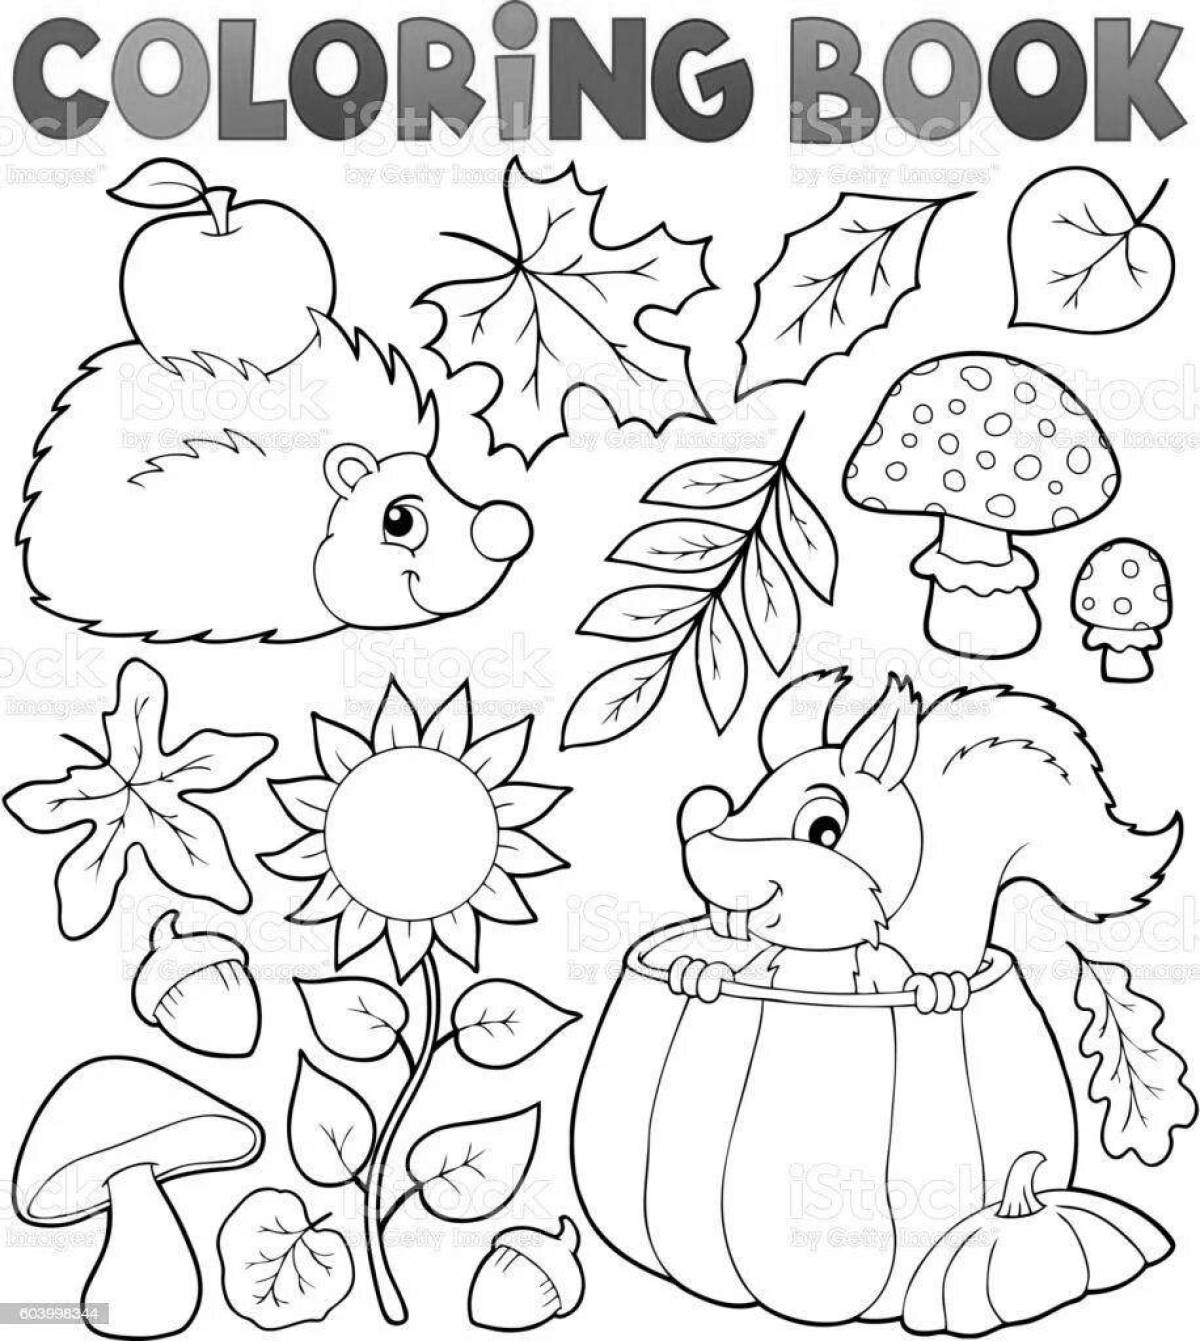 A fun autumn coloring book for 3-4 year olds